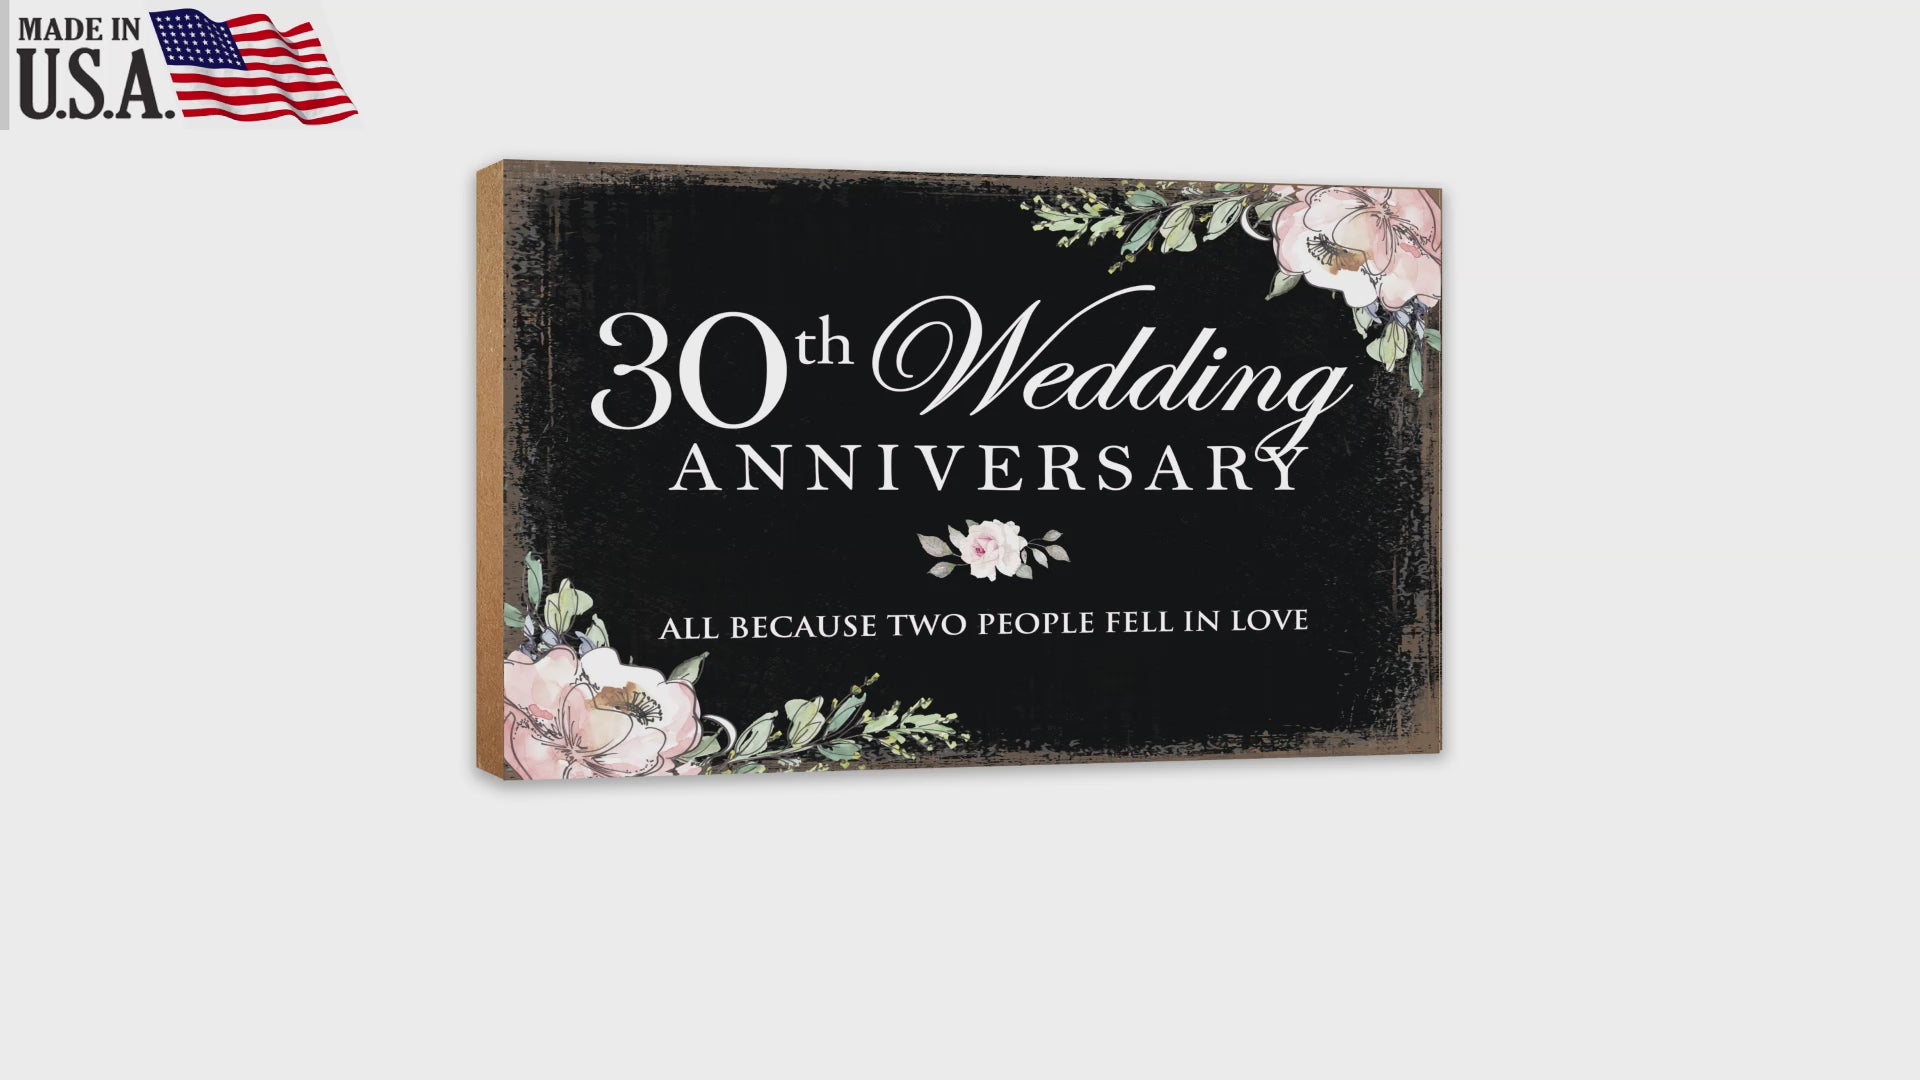 30th Wedding Anniversary Unique Shelf Decor and Tabletop Signs Gift for Couples - Fell In Love